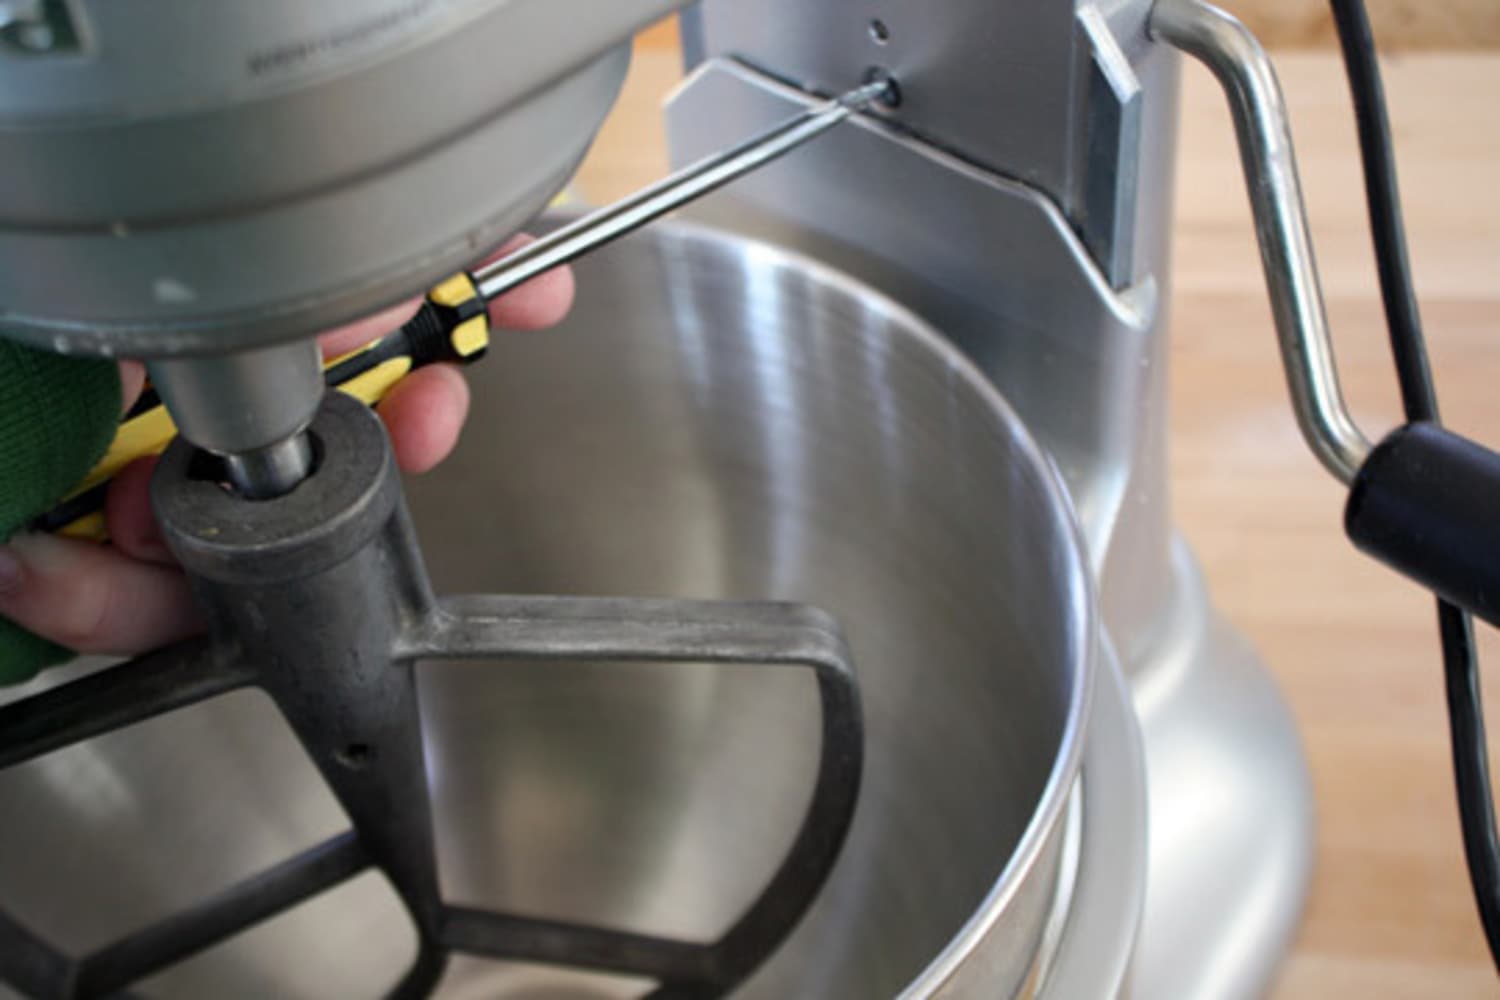 How To: Adjust the Neckpin on Your KitchenAid Stand Mixer 